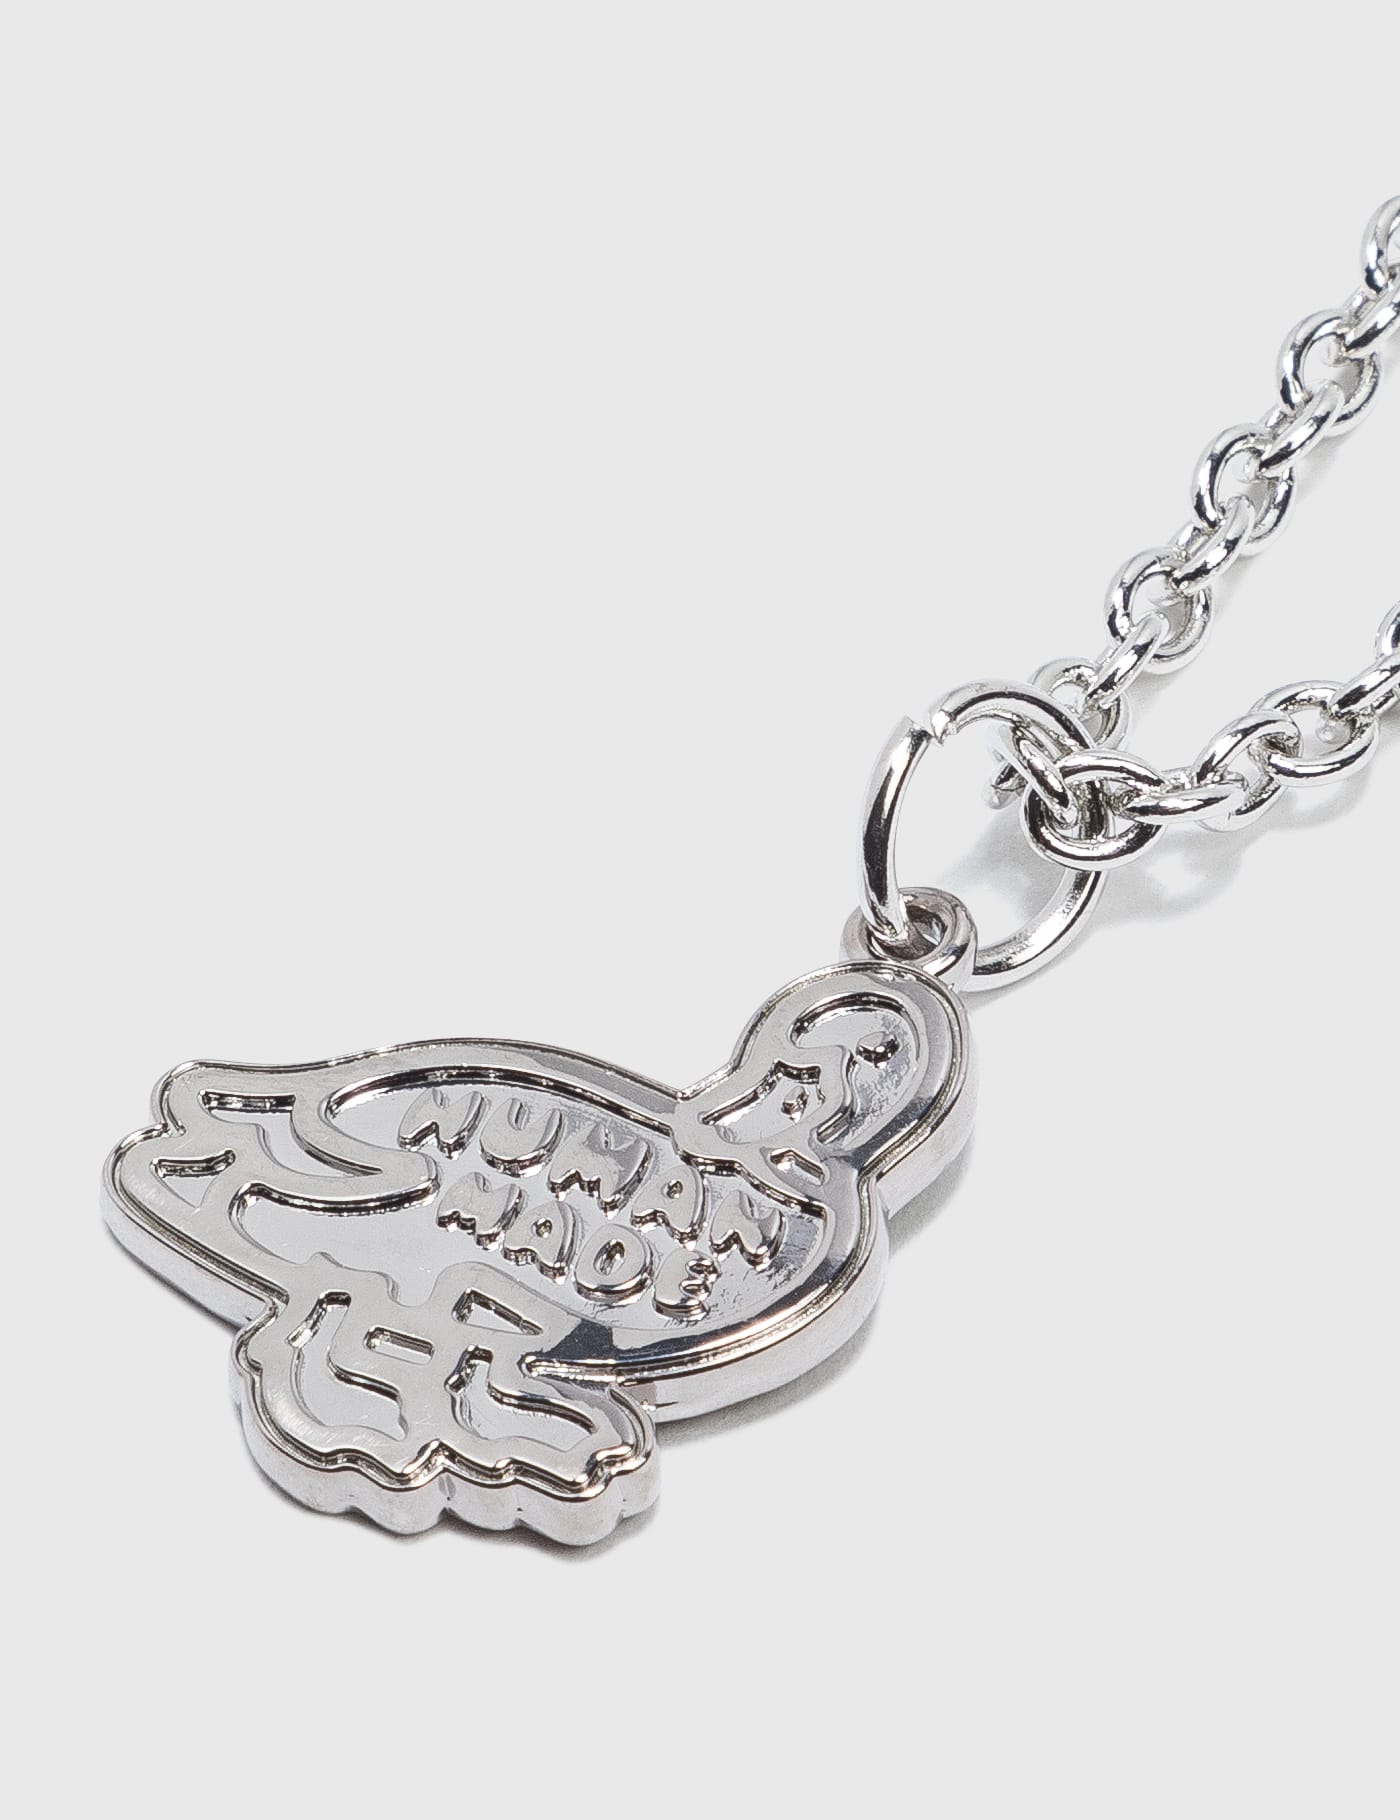 Human Made - Duck Necklace | HBX - Globally Curated Fashion and Lifestyle  by Hypebeast